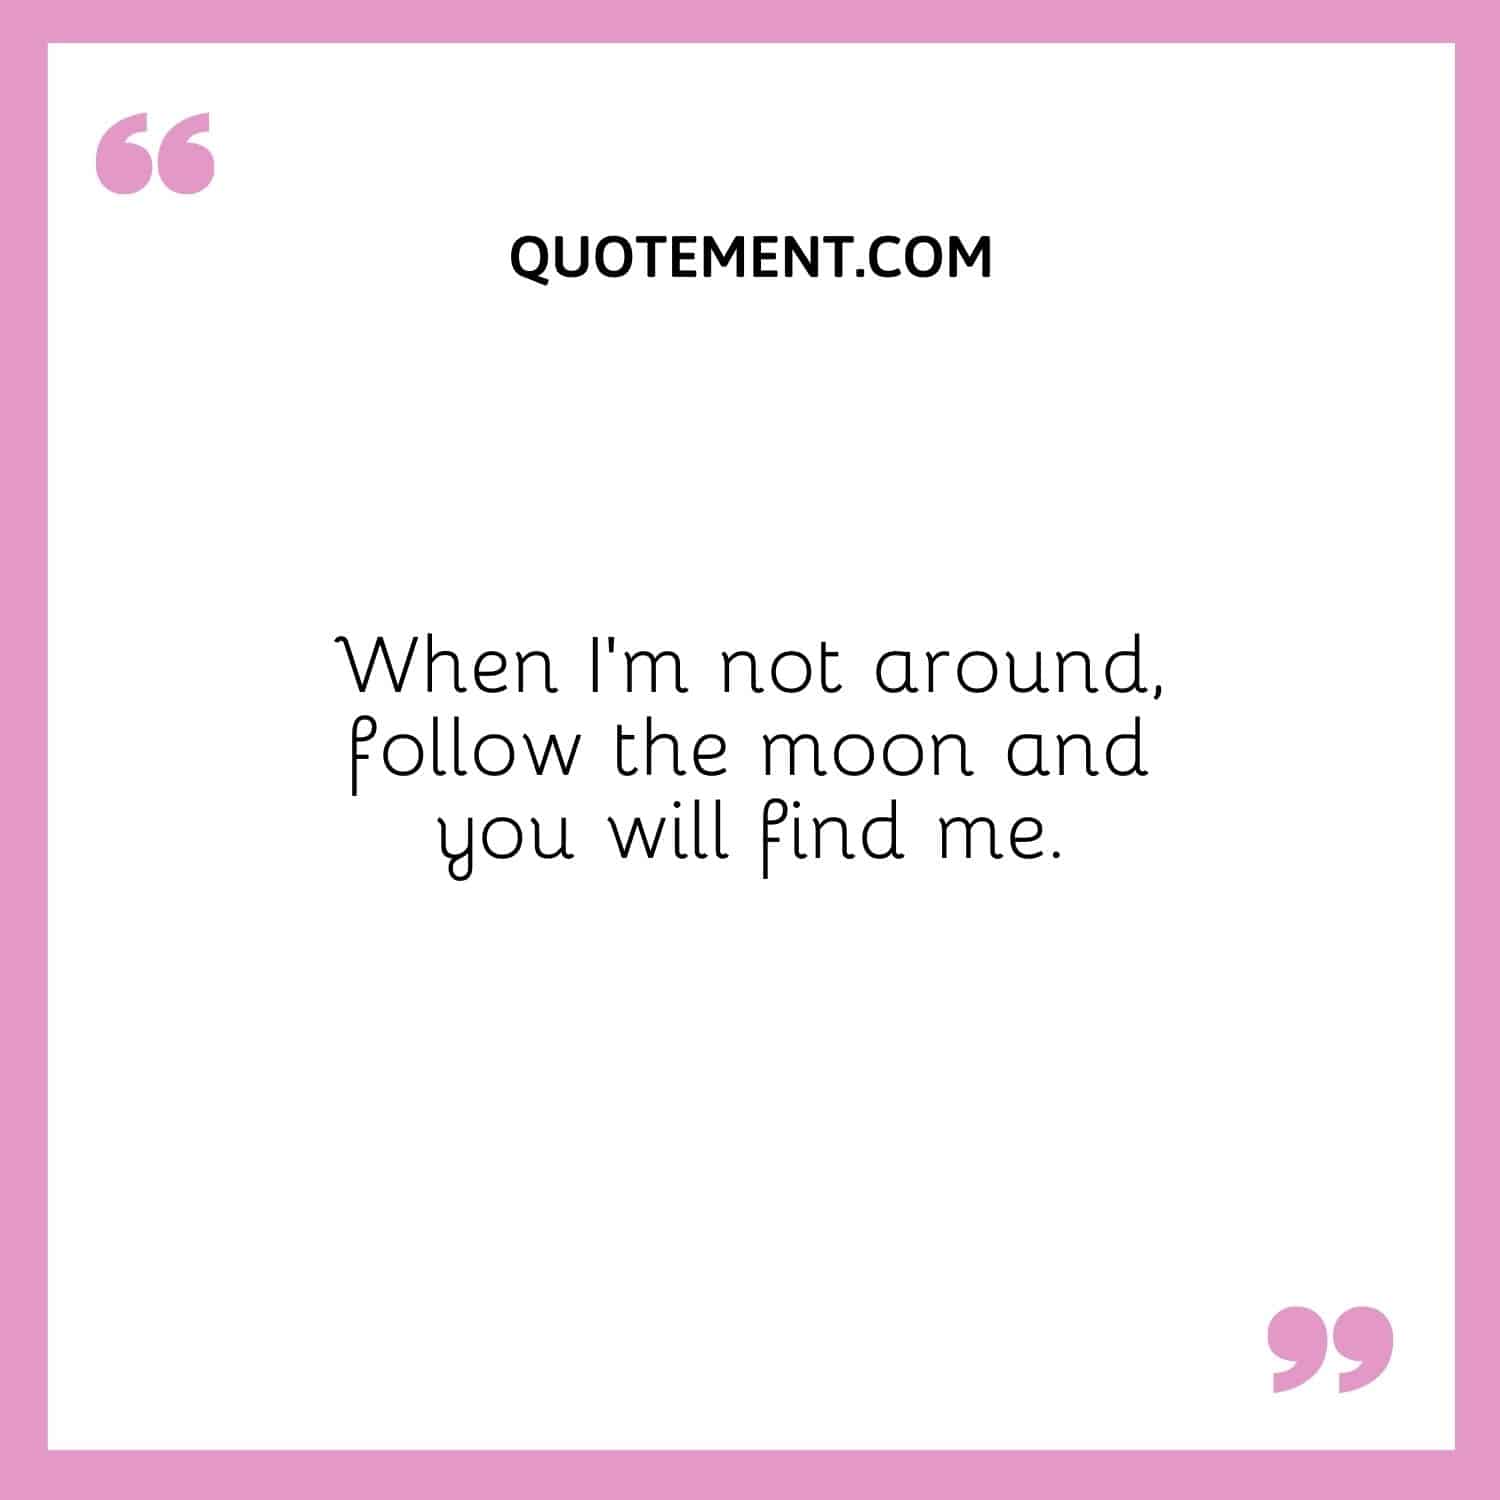 When I’m not around, follow the moon and you will find me.